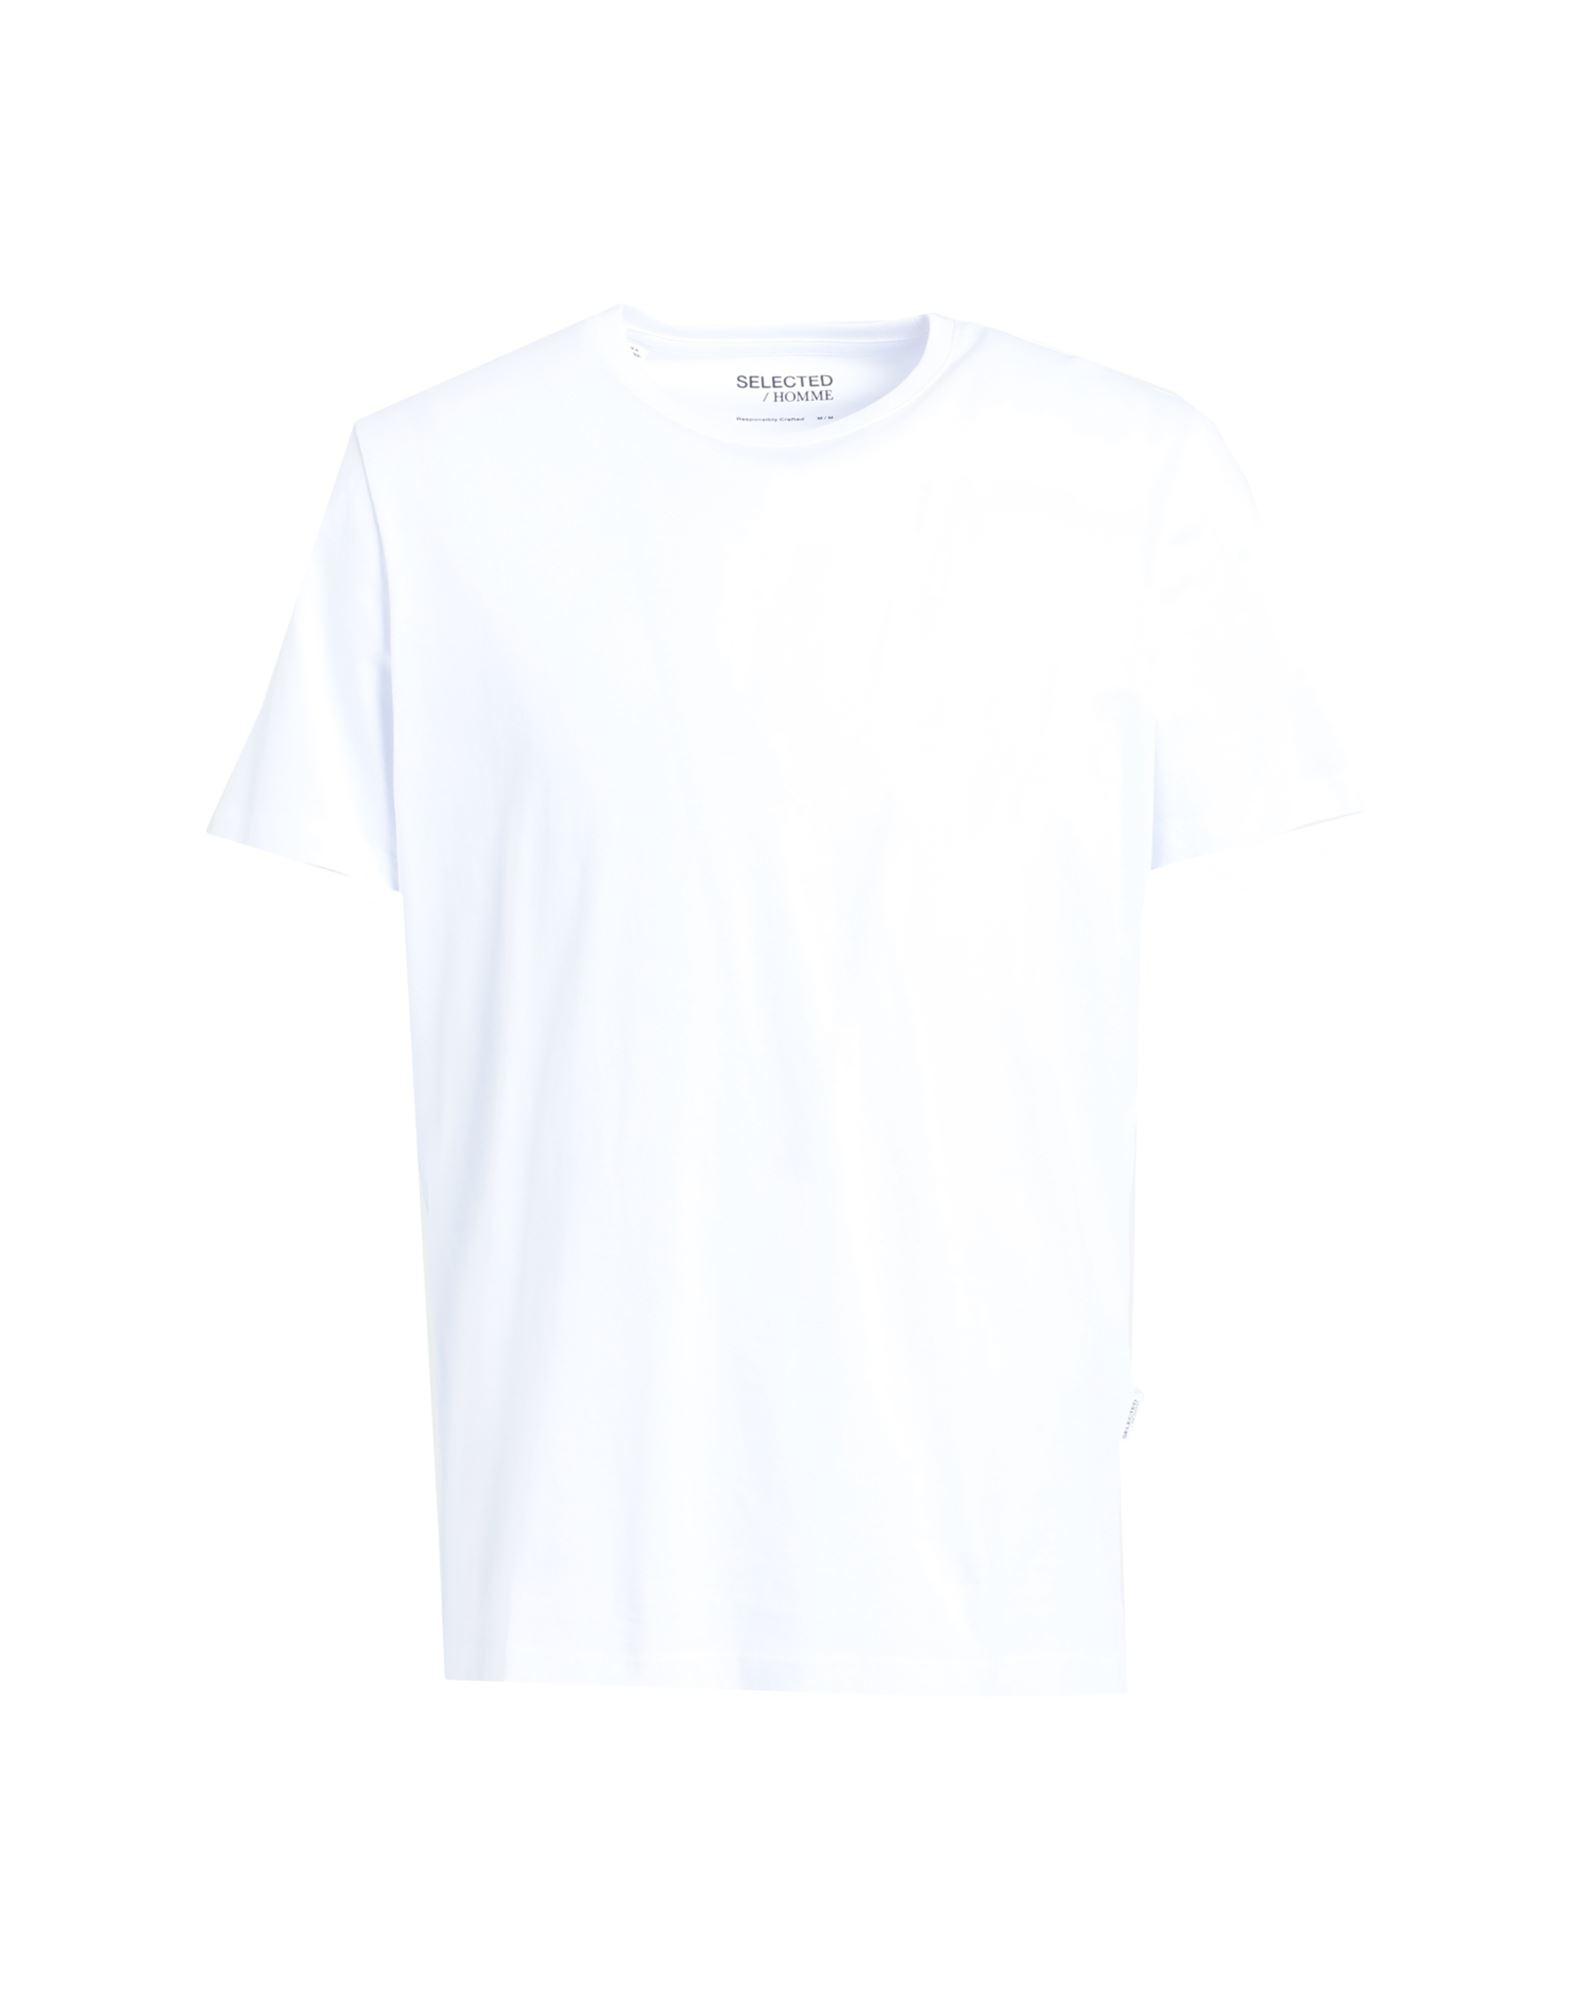 SELECTED HOMME SELECTED HOMME MAN T-SHIRT WHITE SIZE XL ORGANIC COTTON